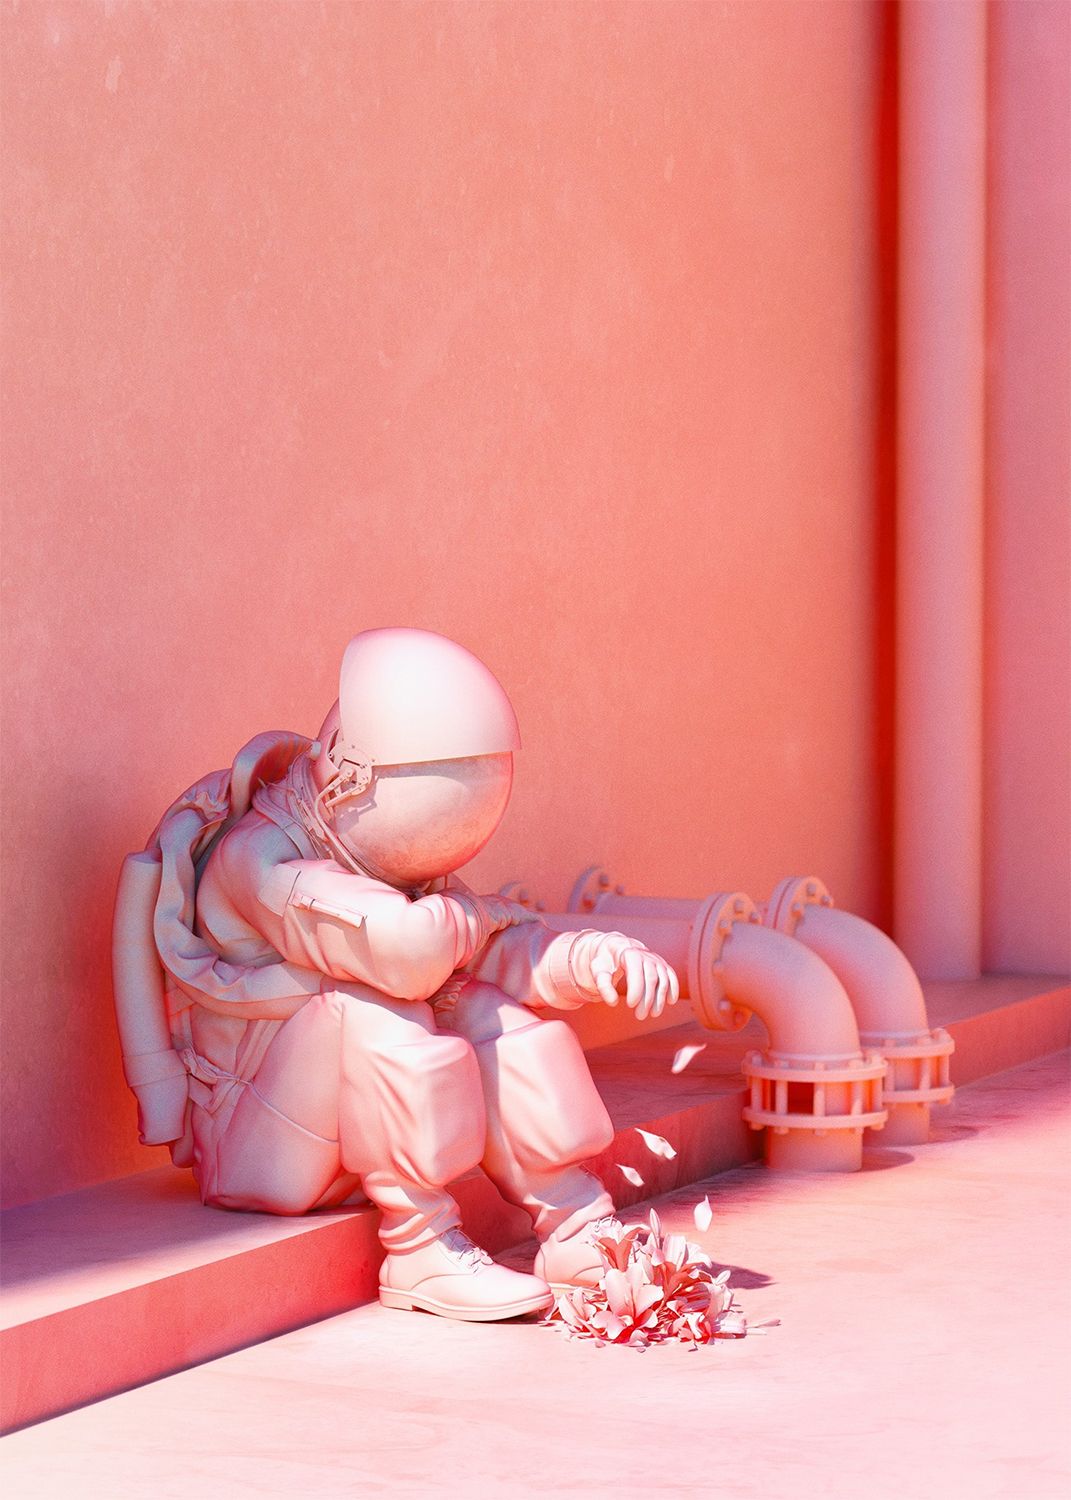 Gallery 57805795 Pink Astronaut?tracking_source=curated_galleries_list. Astronaut Art, Astronaut Wallpaper, Space Artwork